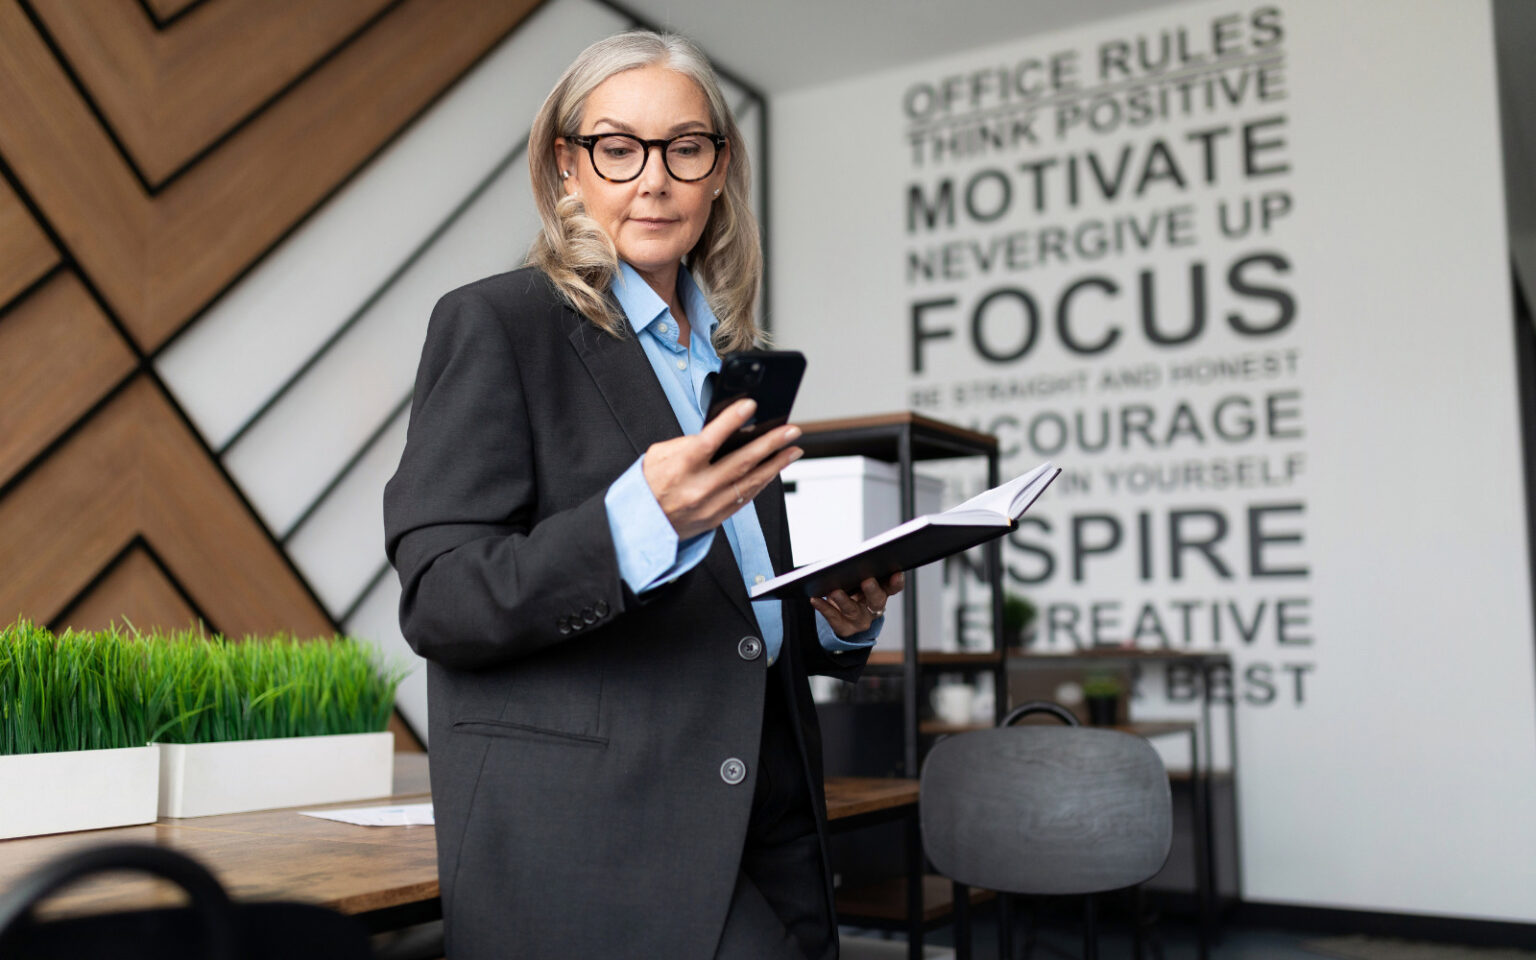 Ageism at work: What employers need to know - Inclusive Employers